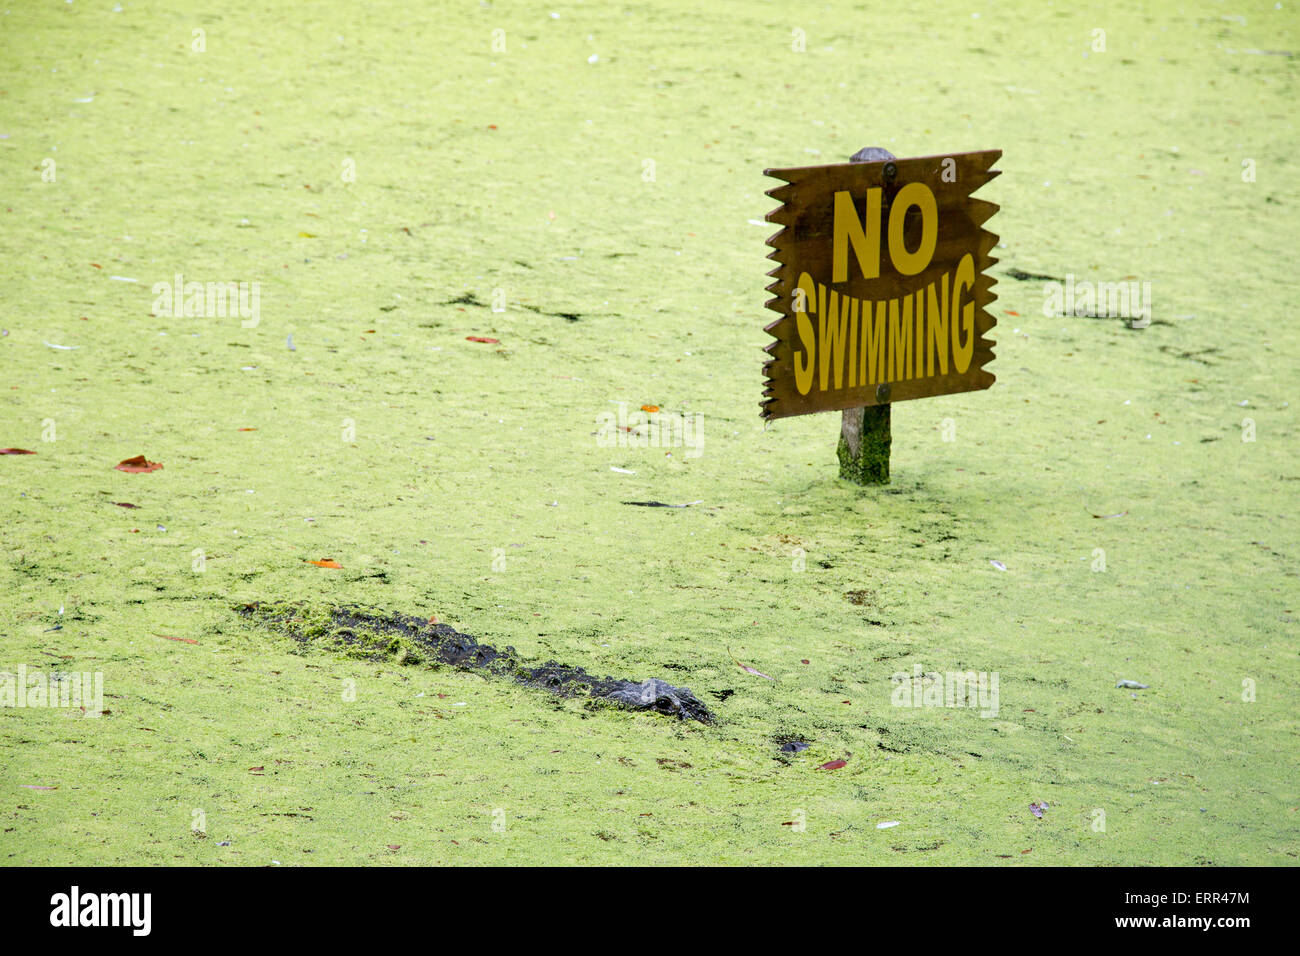 Homosassa Springs, Florida - An alligator in a lagoon next to a 'No Swimming' sign at Homosassa Springs Wildlife State Park. Stock Photo